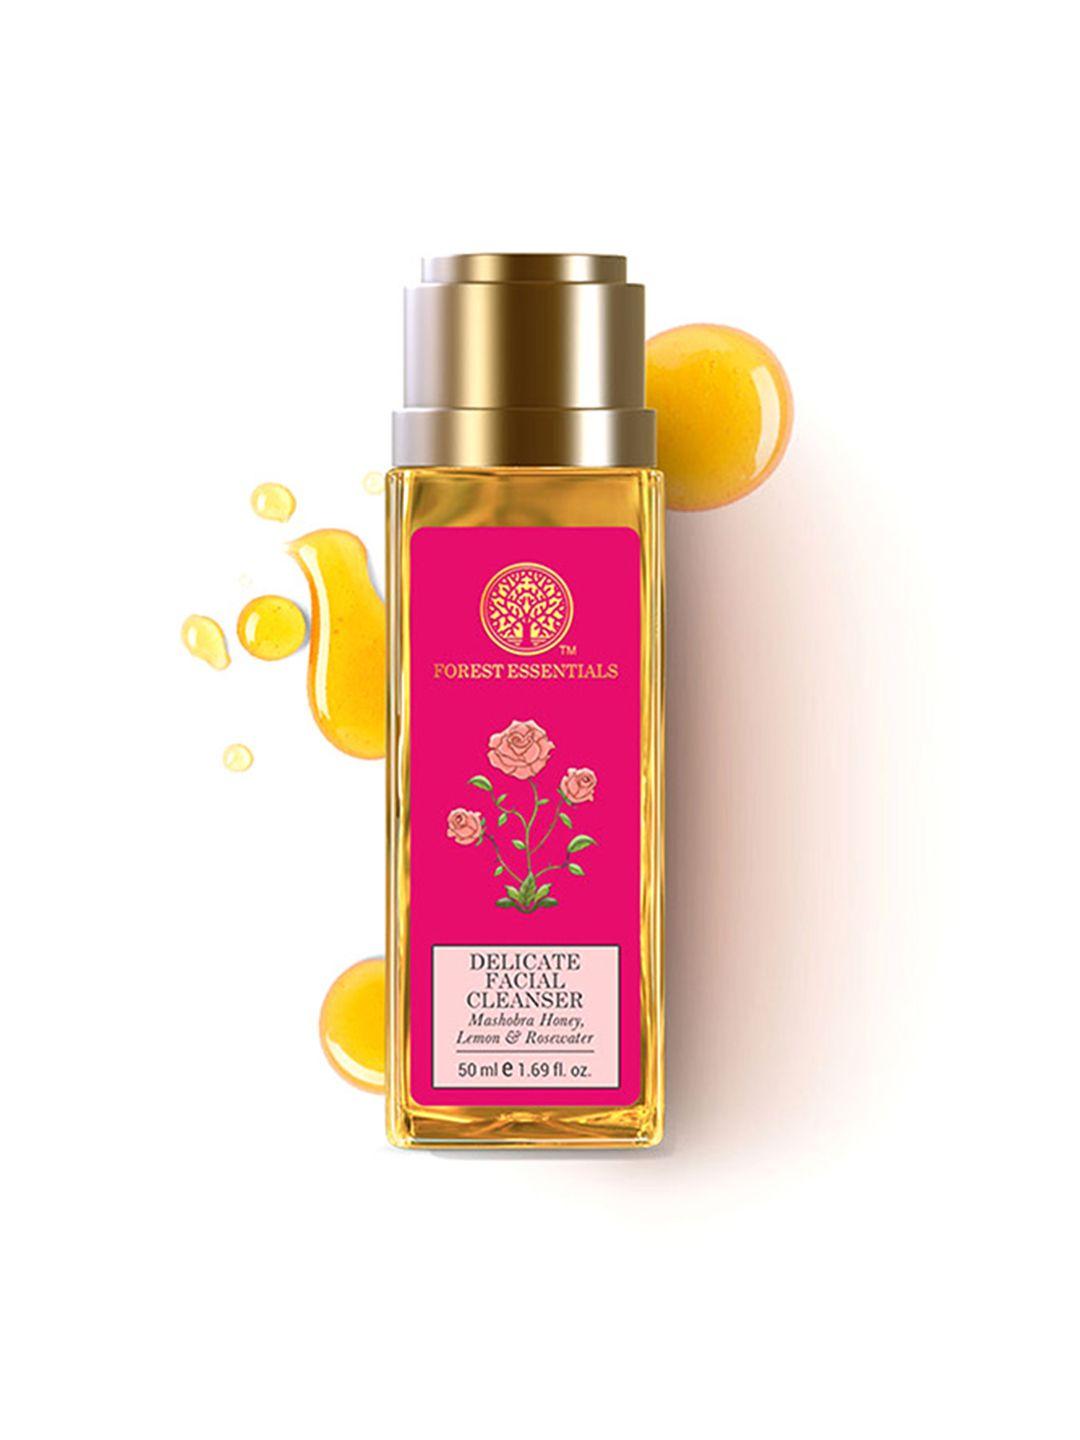 forest essentials delicate facial cleanser with mashobra honey, lemon & rosewater - 50ml